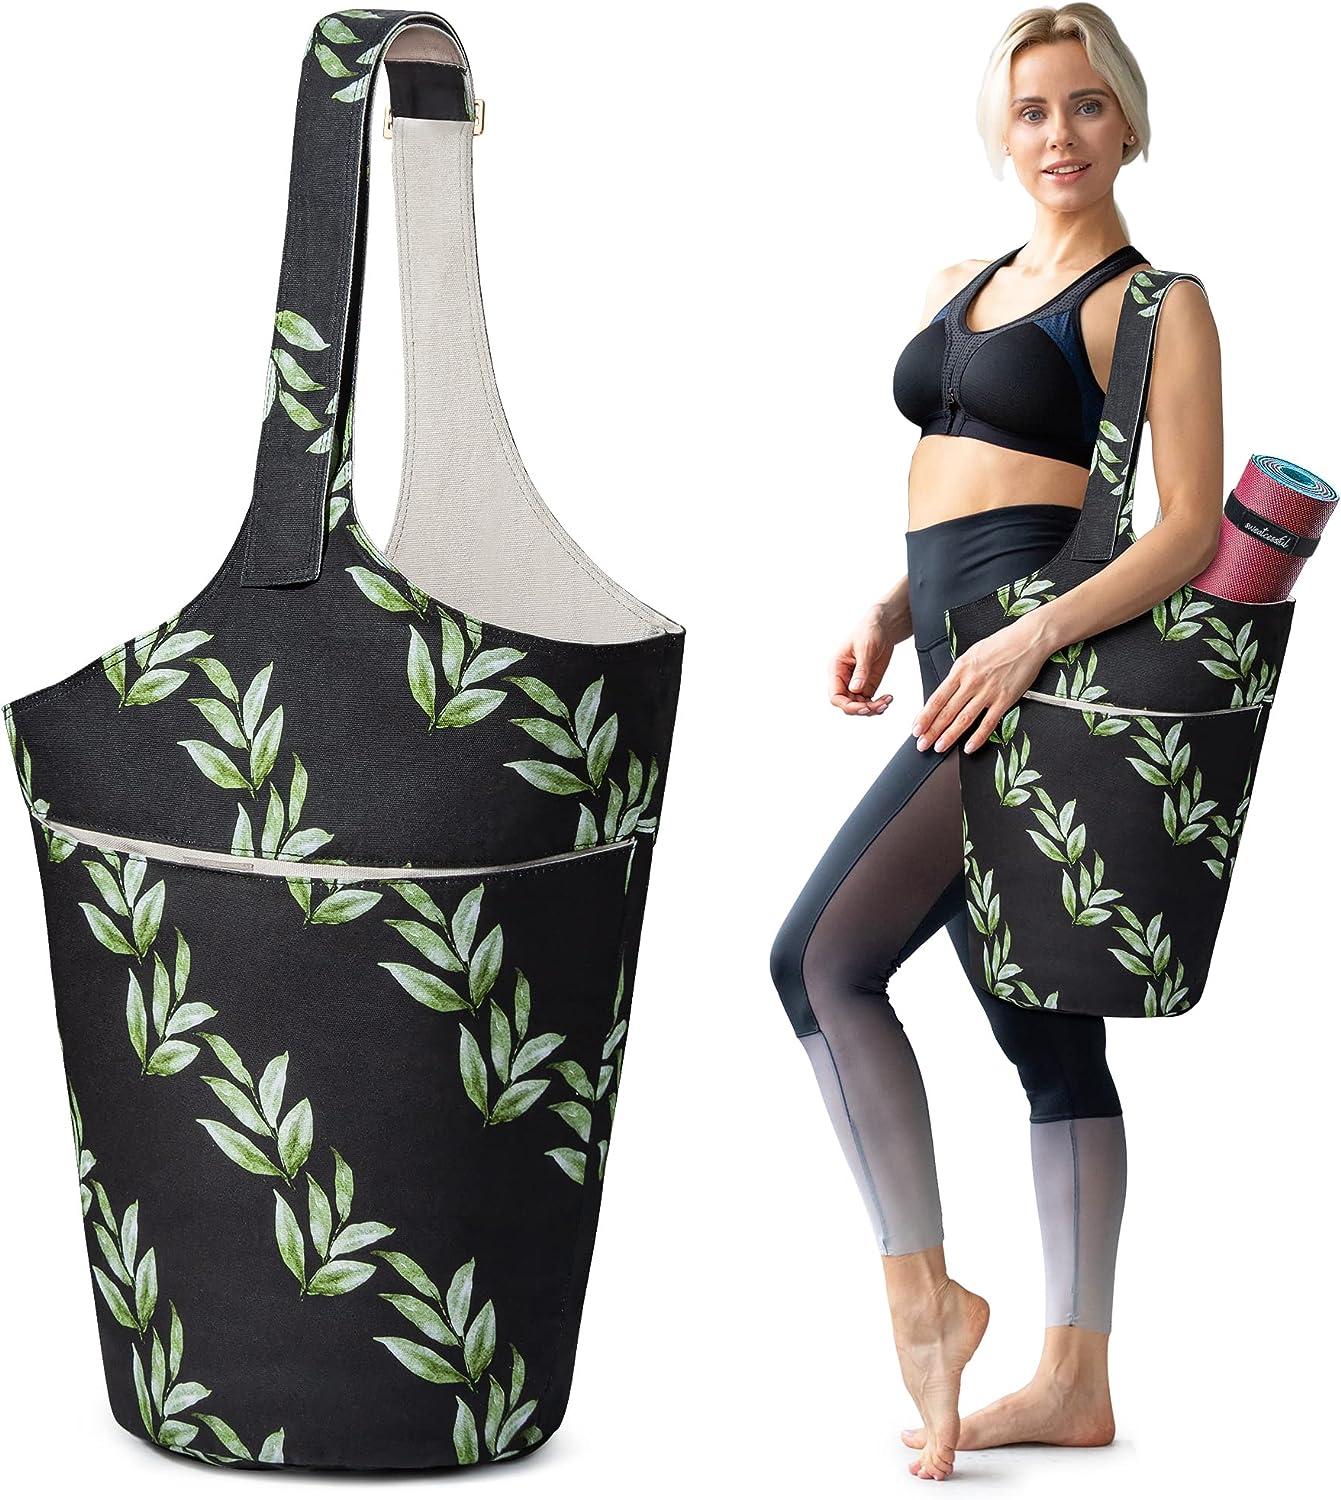 Sweatcessful Yoga Mat Bag - Holds More Yoga Accessories - Extra-Large,  Multi-Functional Tote With Pockets - Wide, Adjustable Shoulder Strap - Fits  Most Size Mats